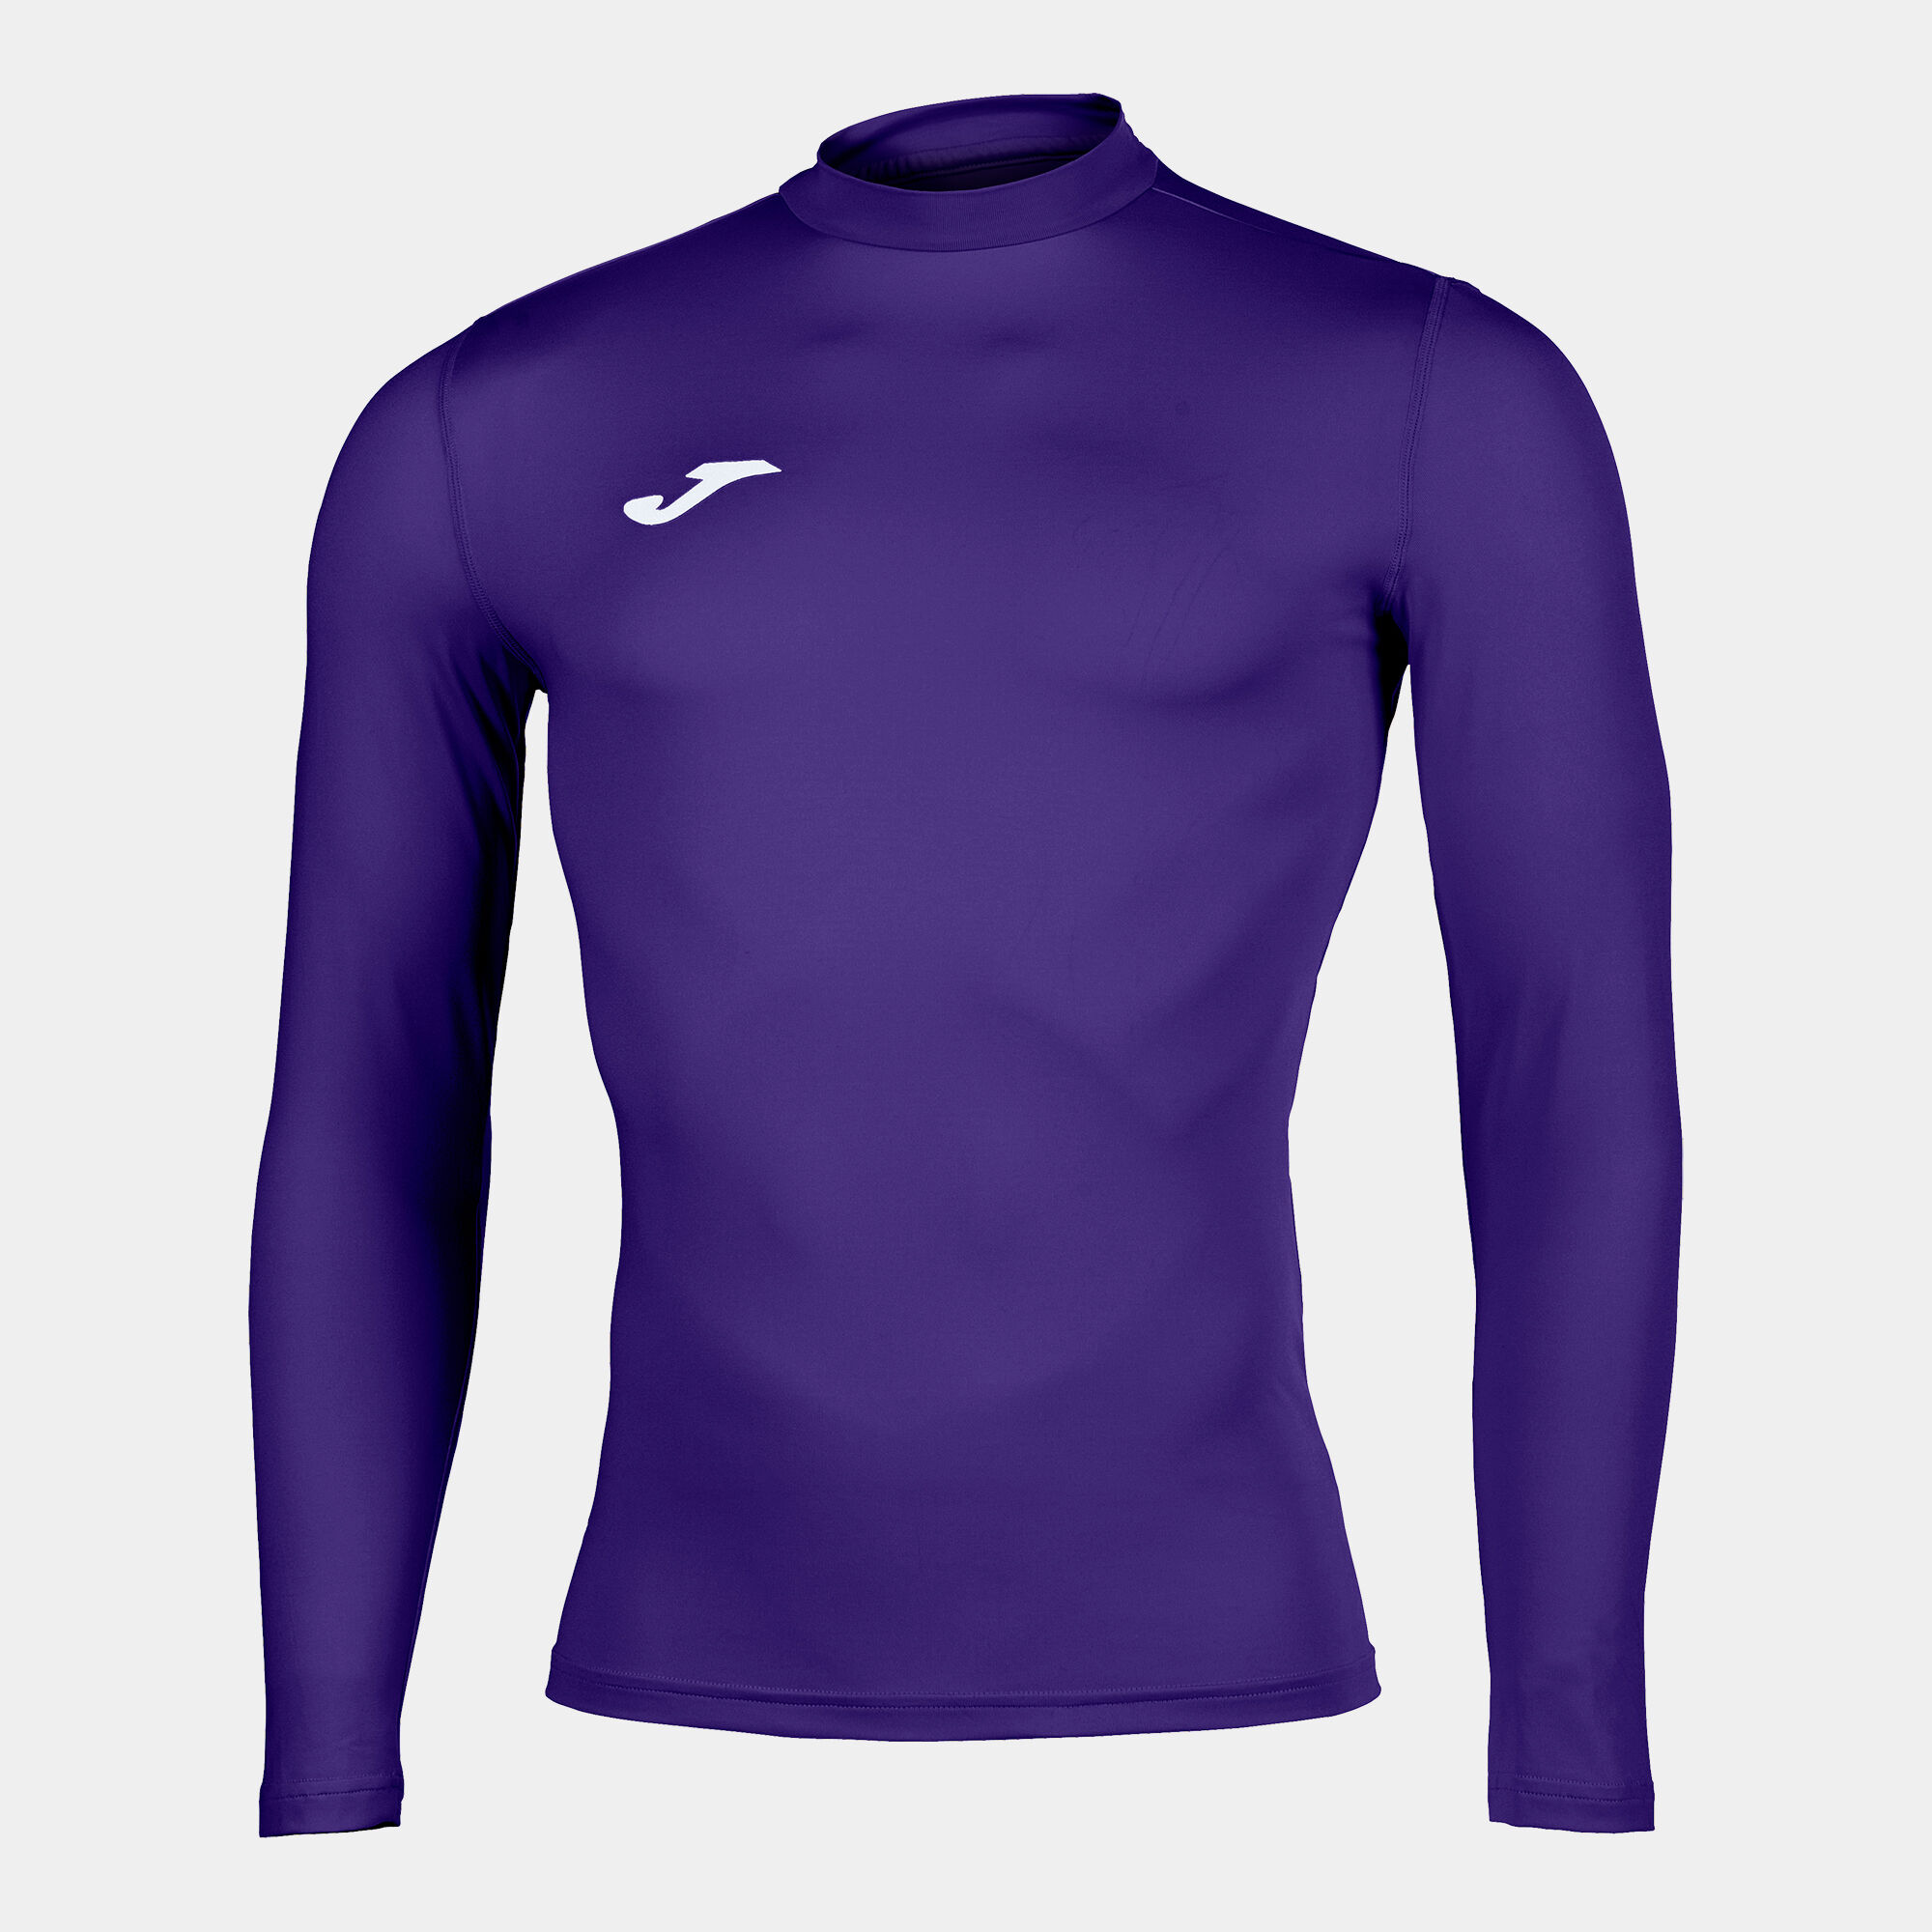 MAILLOT MANCHES LONGUES UNISEXE BRAMA ACADEMY VIOLET